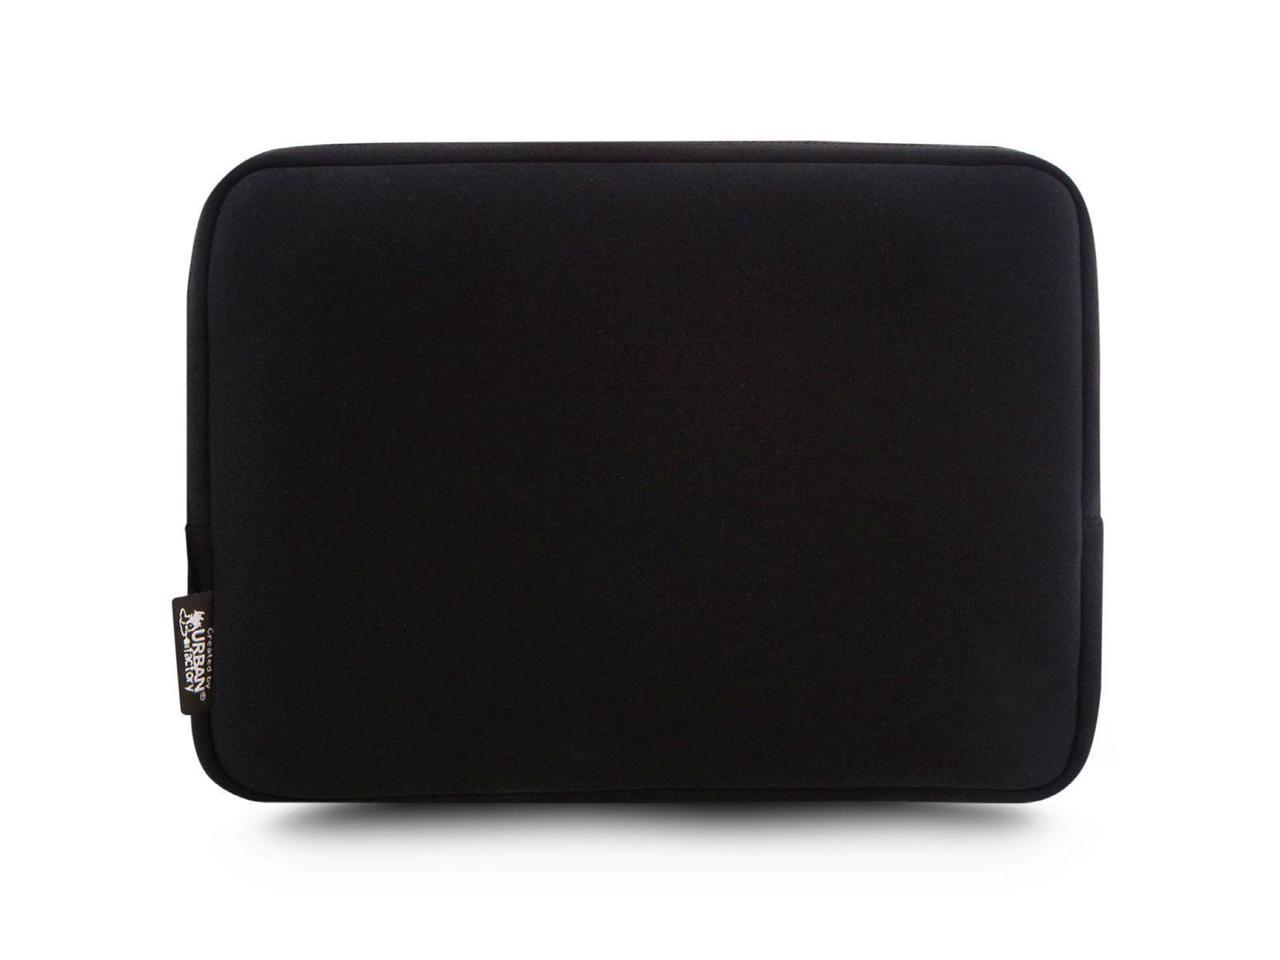 Urban Factory Carrying Case Sleeve for 13" to 14" Notebook Black BNS14UF - image 1 of 3